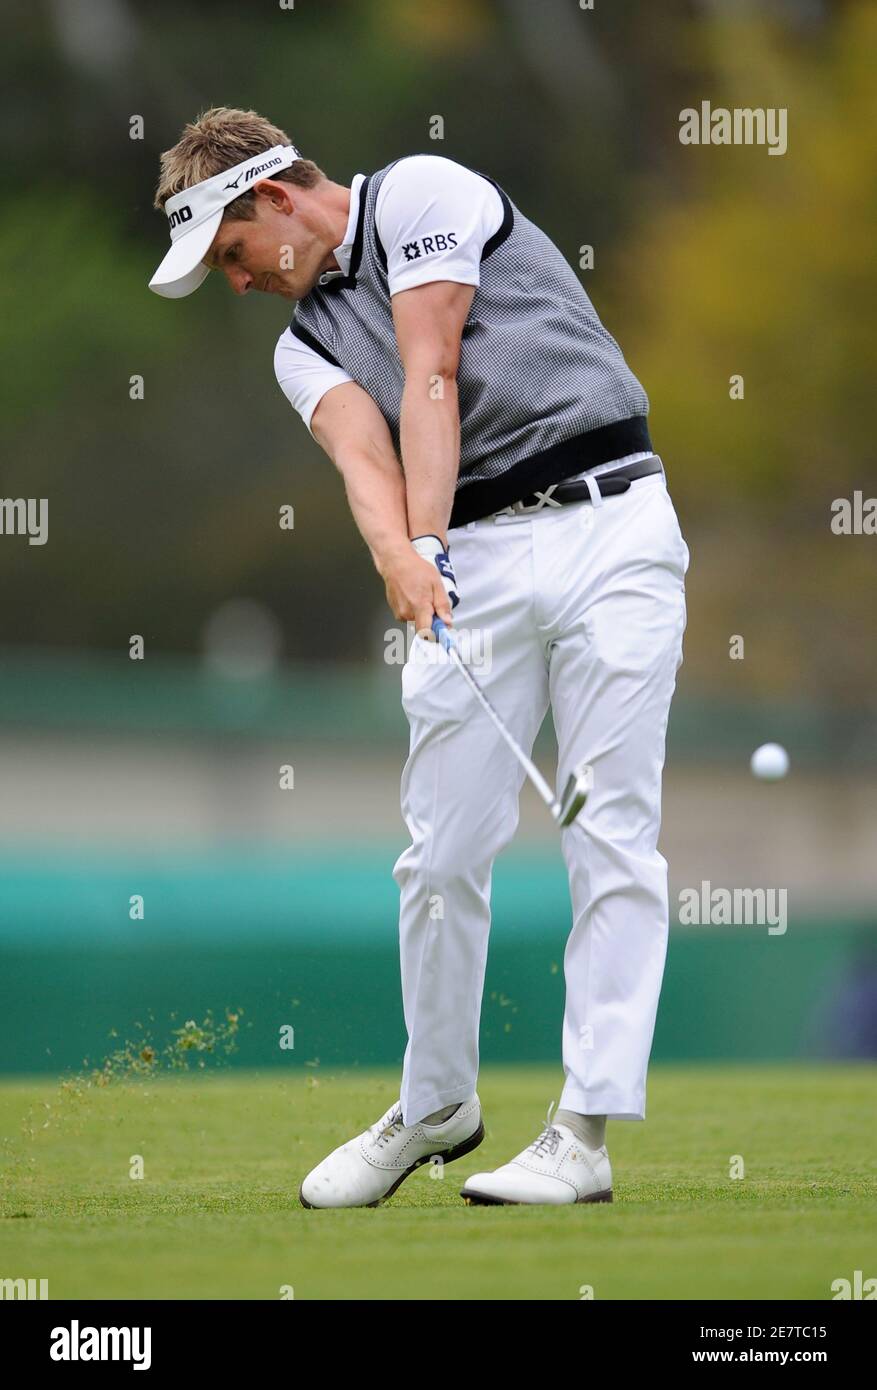 Luke Donald of England hits off the first hole fairway during the final round of the Northern Trust Open golf tournament in the Pacific Palisades area of Los Angeles February 22, 2009. REUTERS/Gus Ruelas (UNITED STATES) Stock Photo